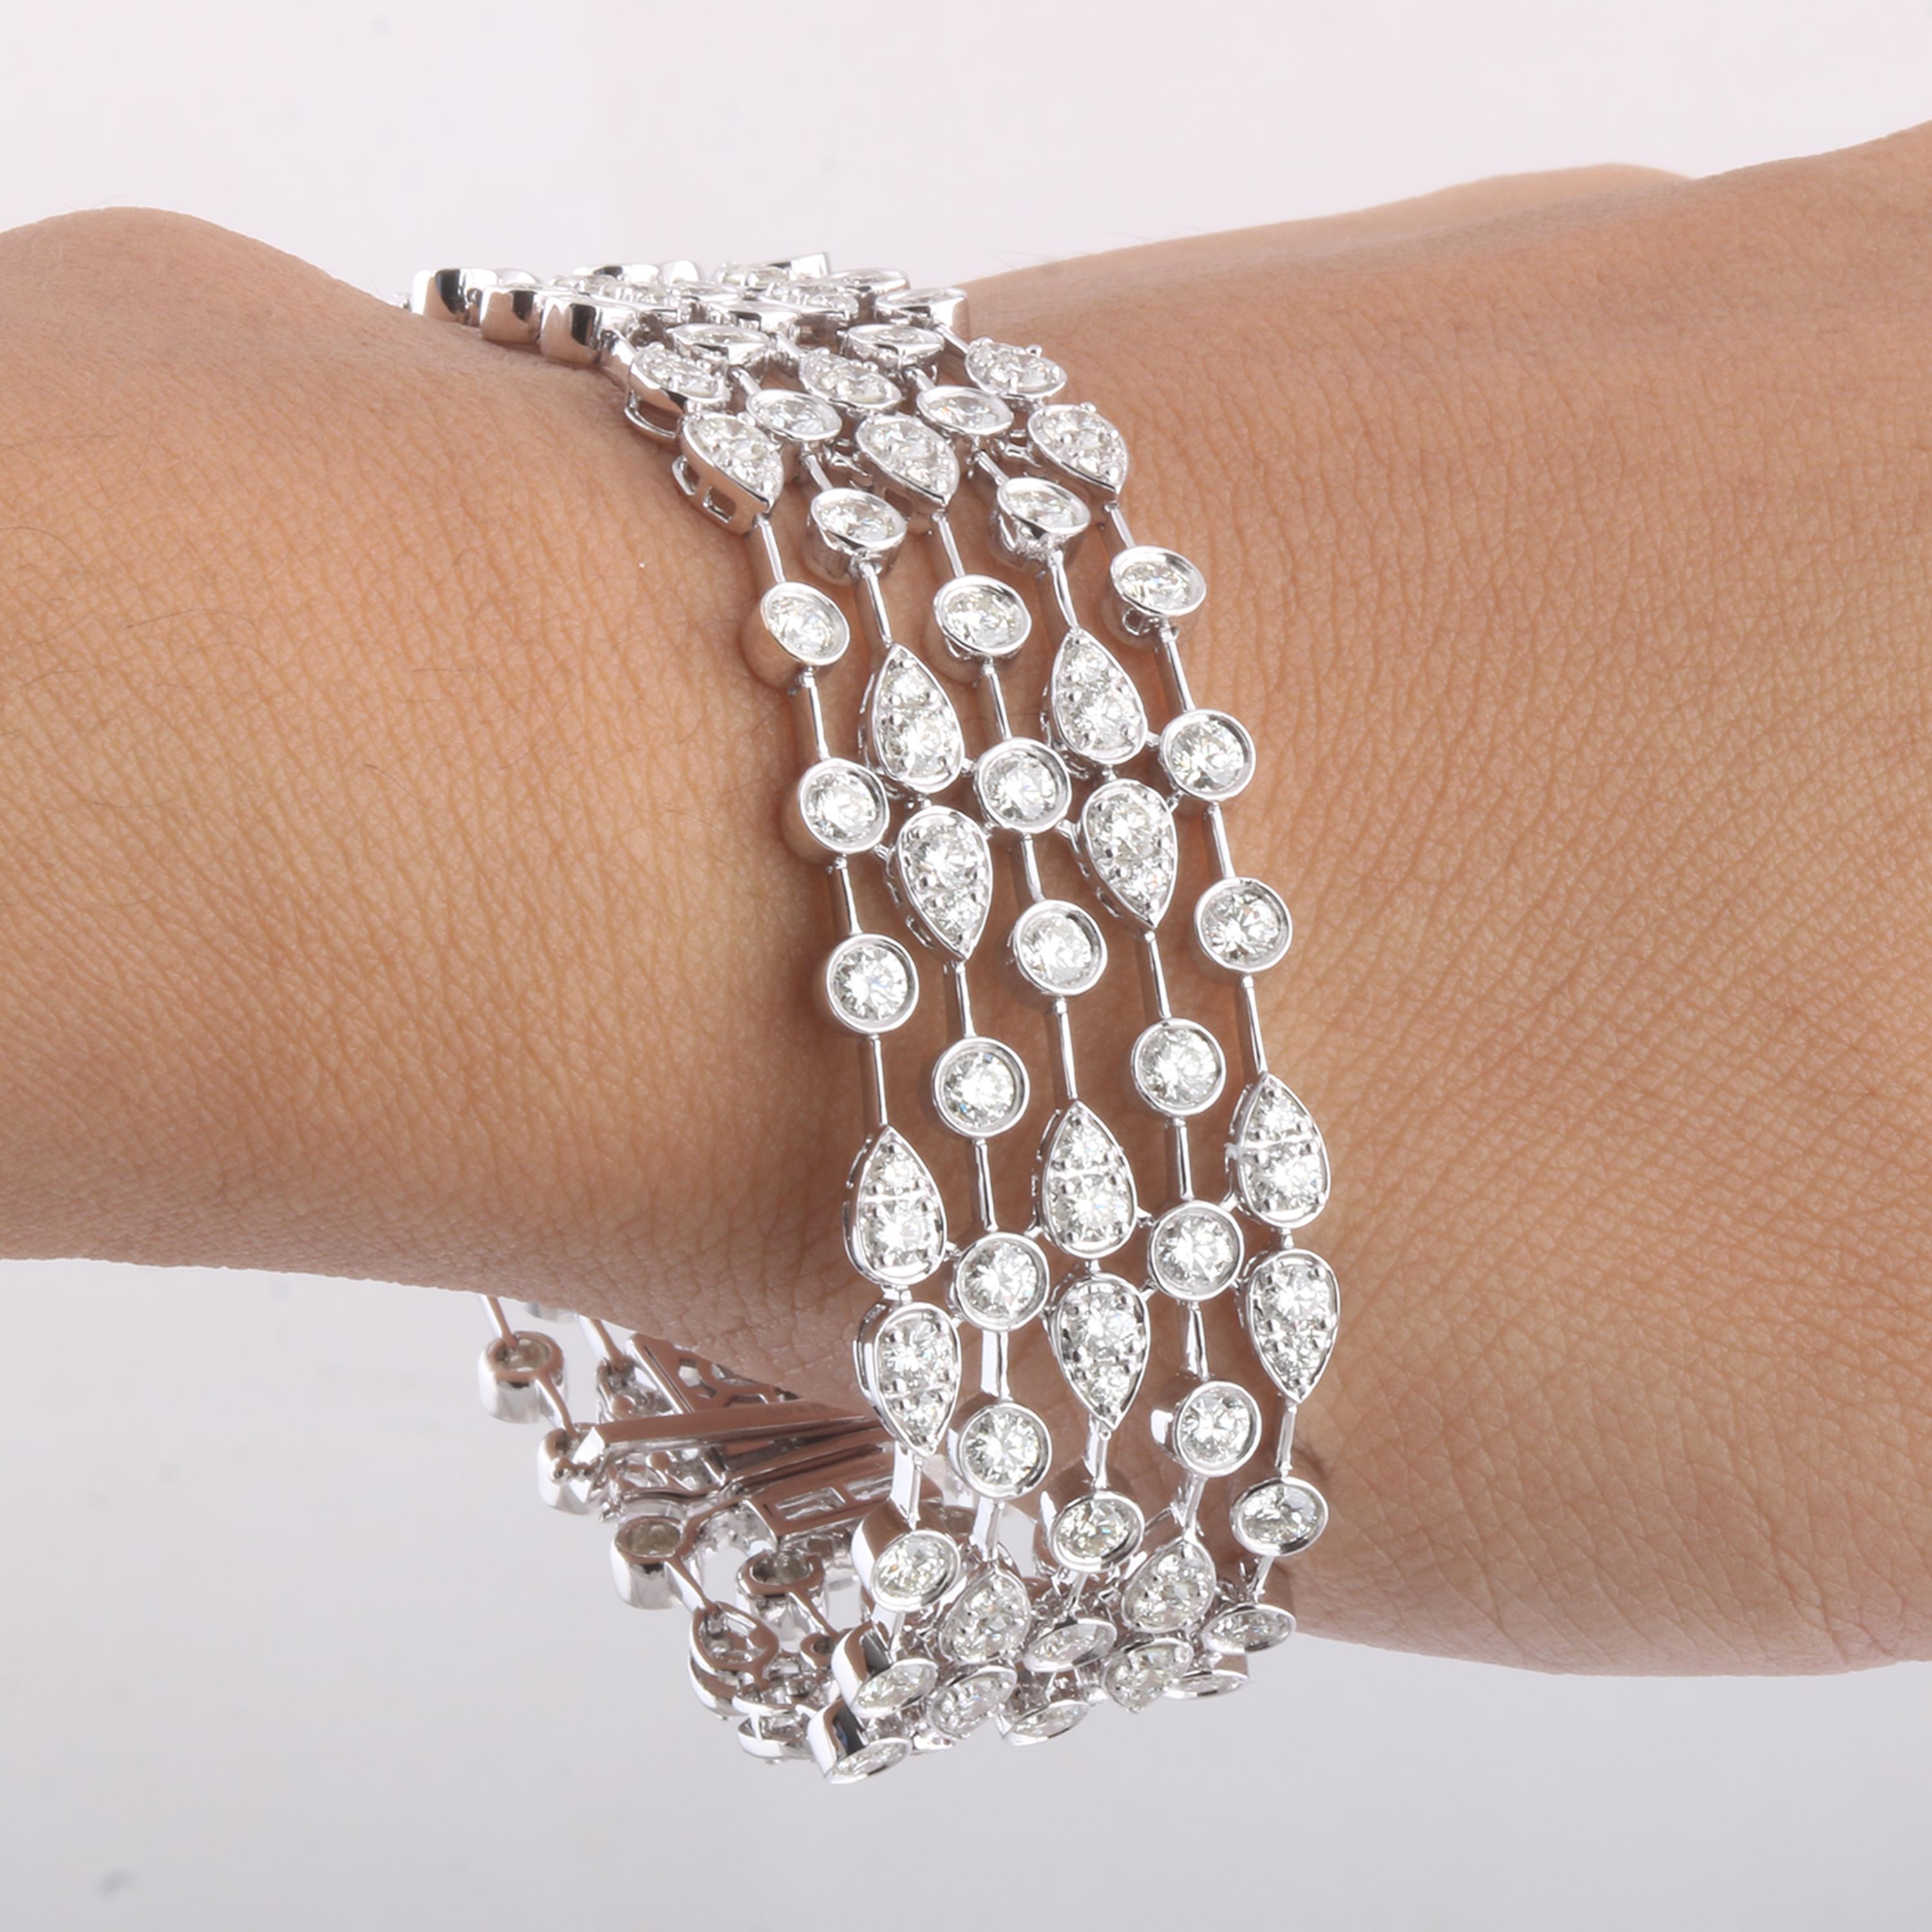 Gross Weight: 30.18 Grams
Diamond Weight: 10.32 cts
Size: 6.95 Inch (Lenght of Tennis Bracelet)
IGI Certification can be done on request.

Video of the product can be shared on request.

This modern-day bracelet is crafted using 14 Karat white gold